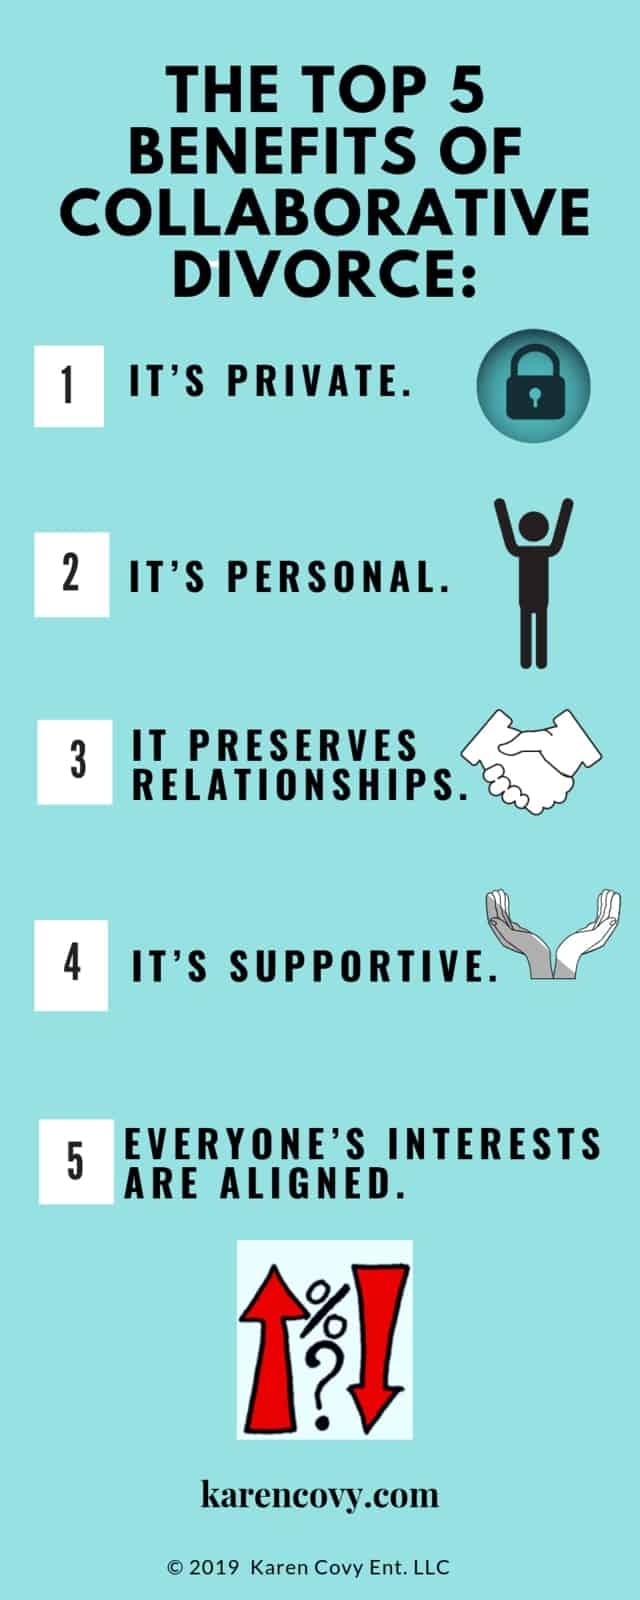 Infographic listing the top 5 benefits of Collaborative Divorce.